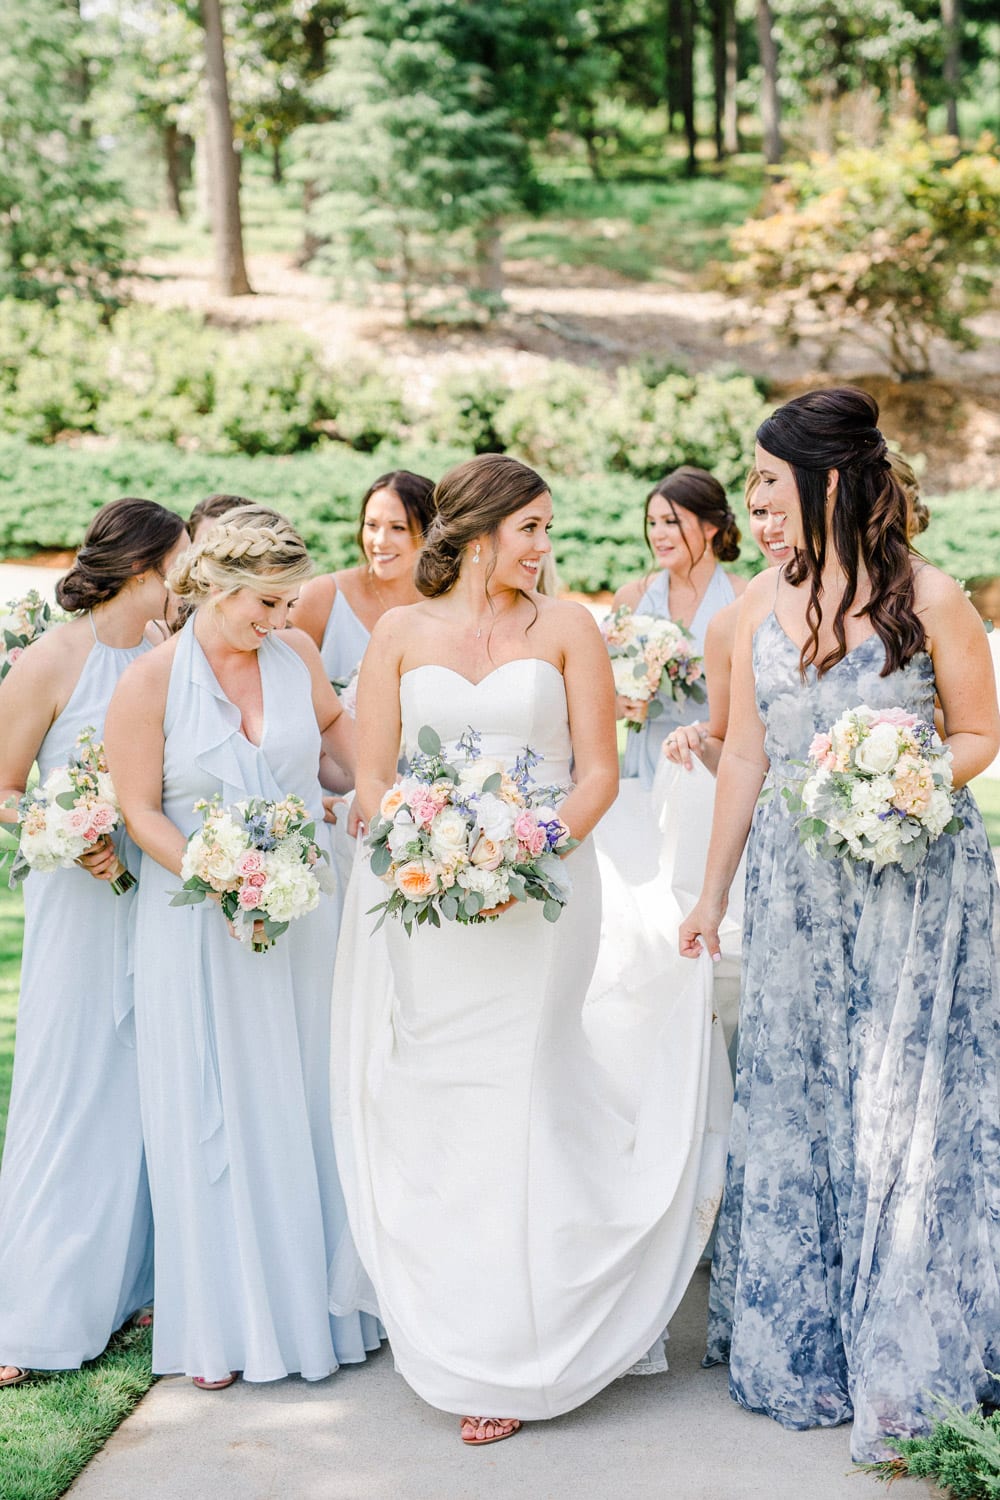 Bride and bridesmaids walk on sidewalk with flowers